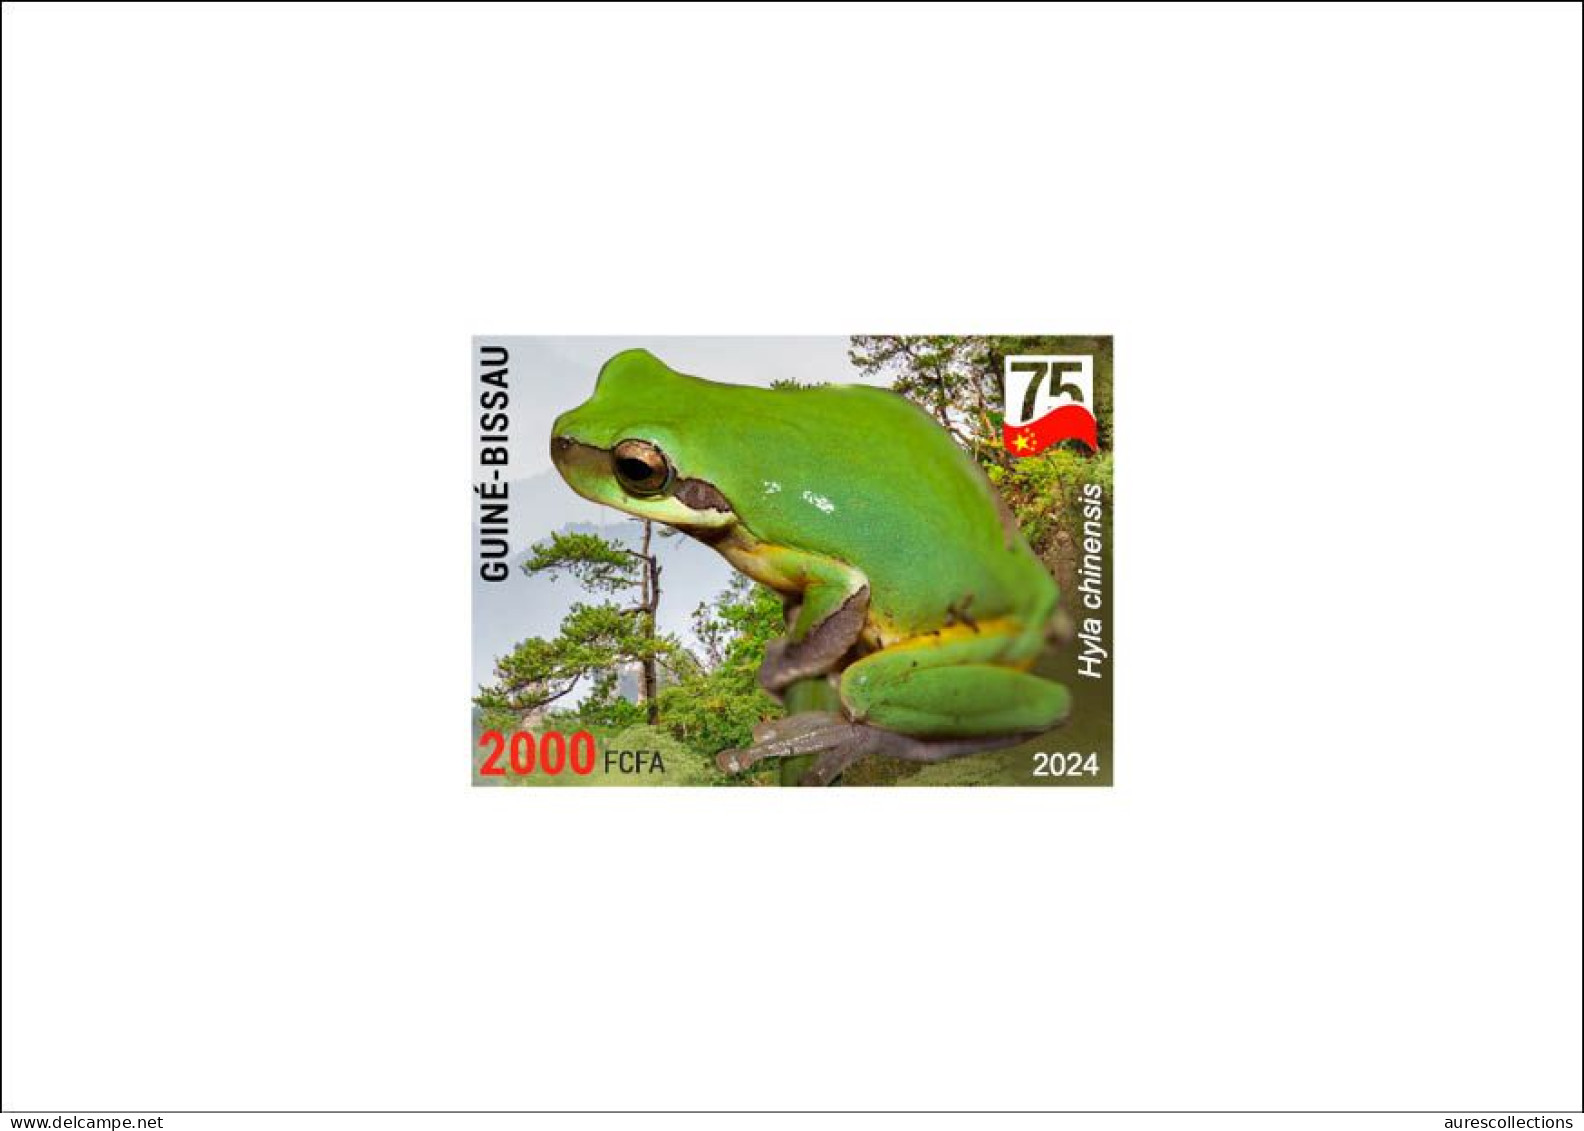 GUINEA BISSAU 2024 DELUXE PROOF - CHINA AMPHIBIANS & REPTILES - CHINESE TREE FROG FROGS GRENOUILLES - CHINA 75 ANNIV. - Kikkers